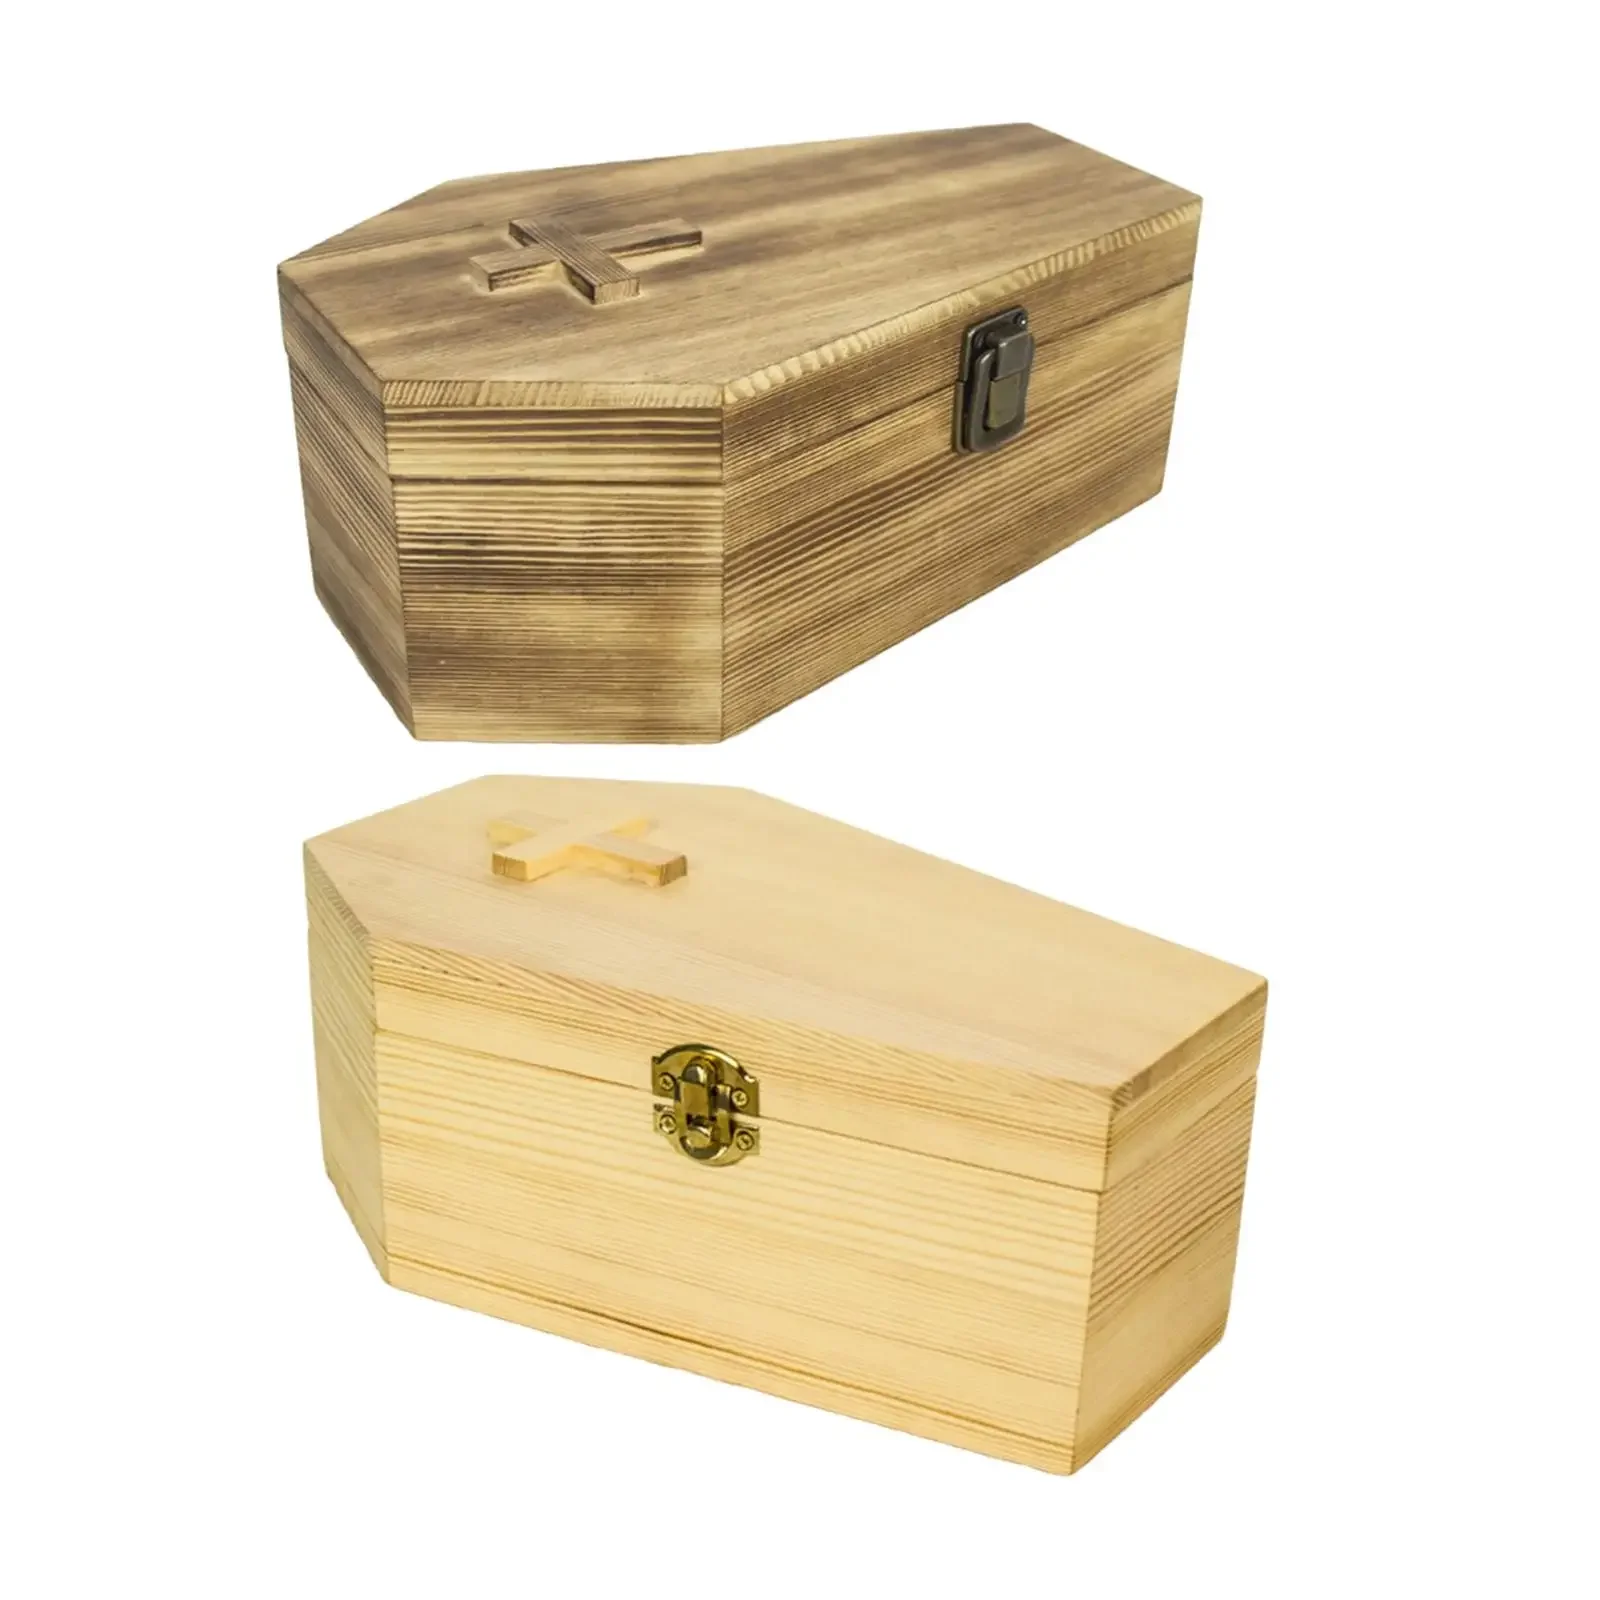 Wooden Pet Cremation Urn for Dogs Memorial Keepsake Precious Souvenirs Remembrance for Funerary Caskets Supplies